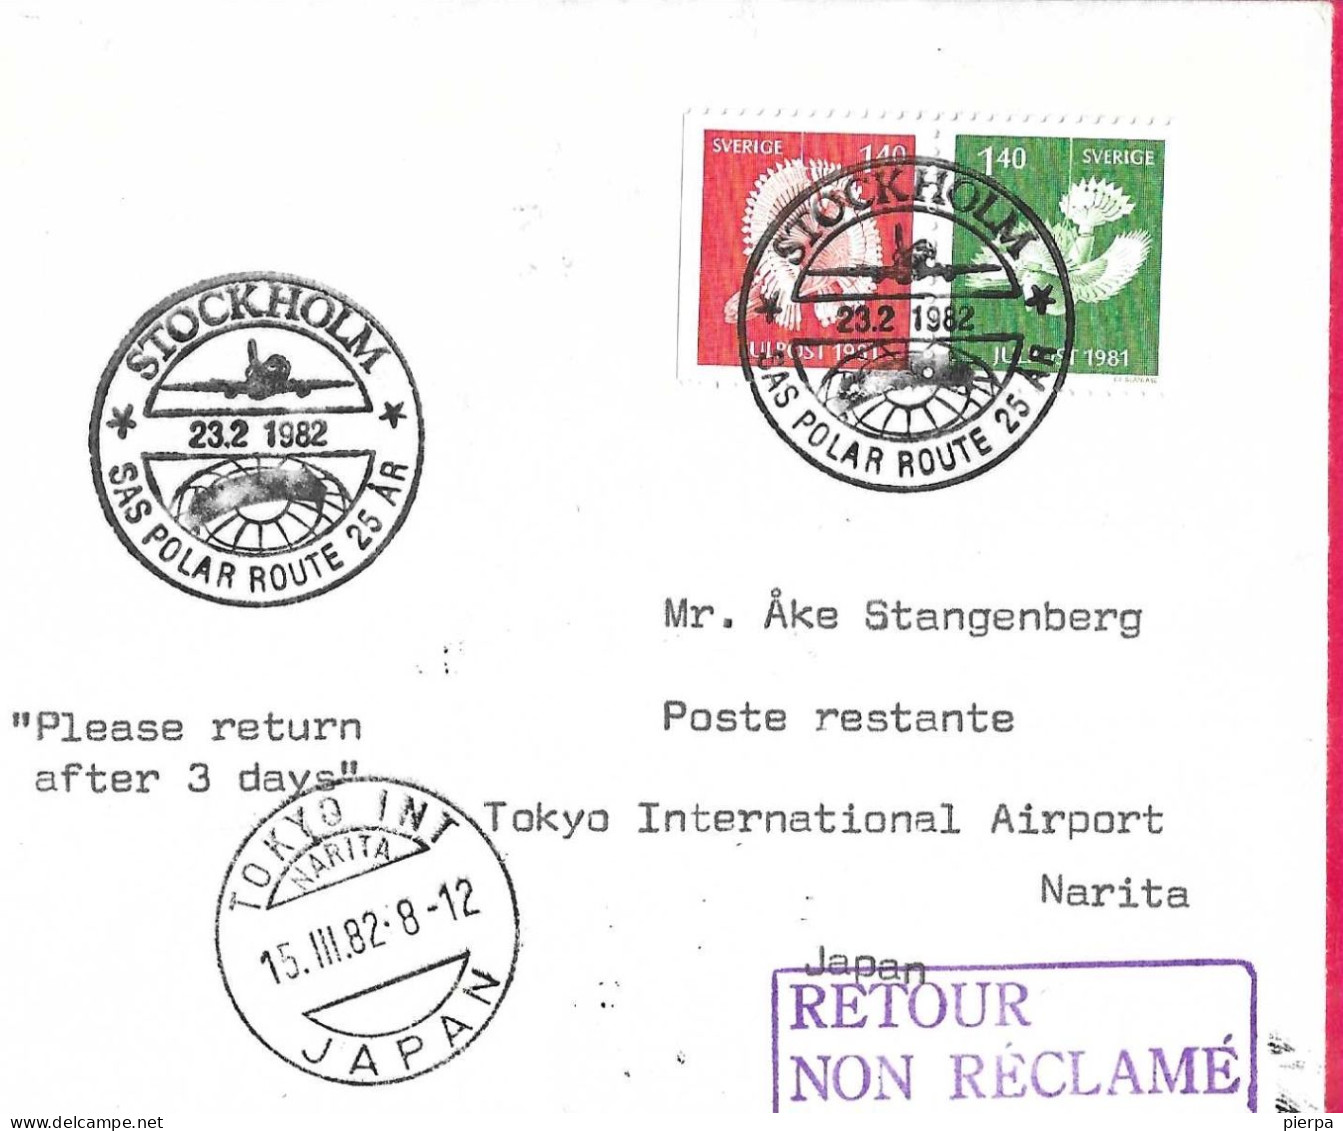 SVERIGE - SAS POLAR ROUTE 25 AR - FROM STOCKHOLM TO TOKYO * 23.2.1982* ON COVER - Lettres & Documents